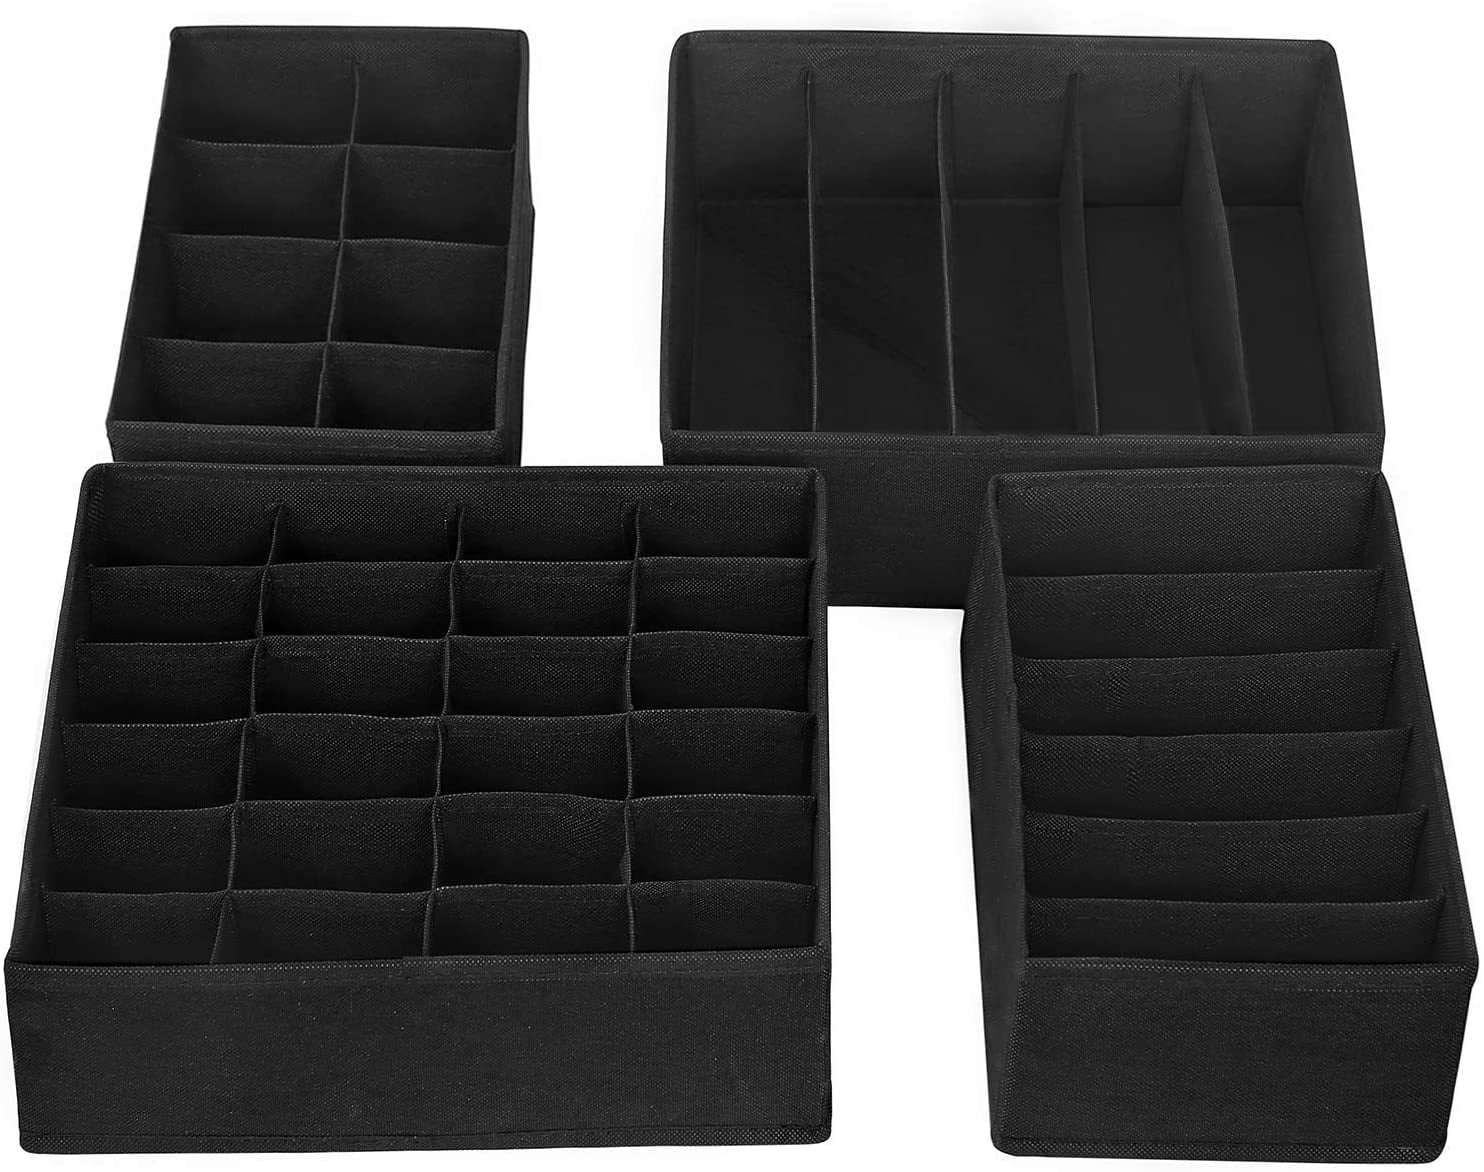 Collapsible Closet Dividers for Bras Socks Black RUS04H Ties and Scarves SONGMICS Drawer Organiser Set of 4 Underwear Foldable Storage Box 